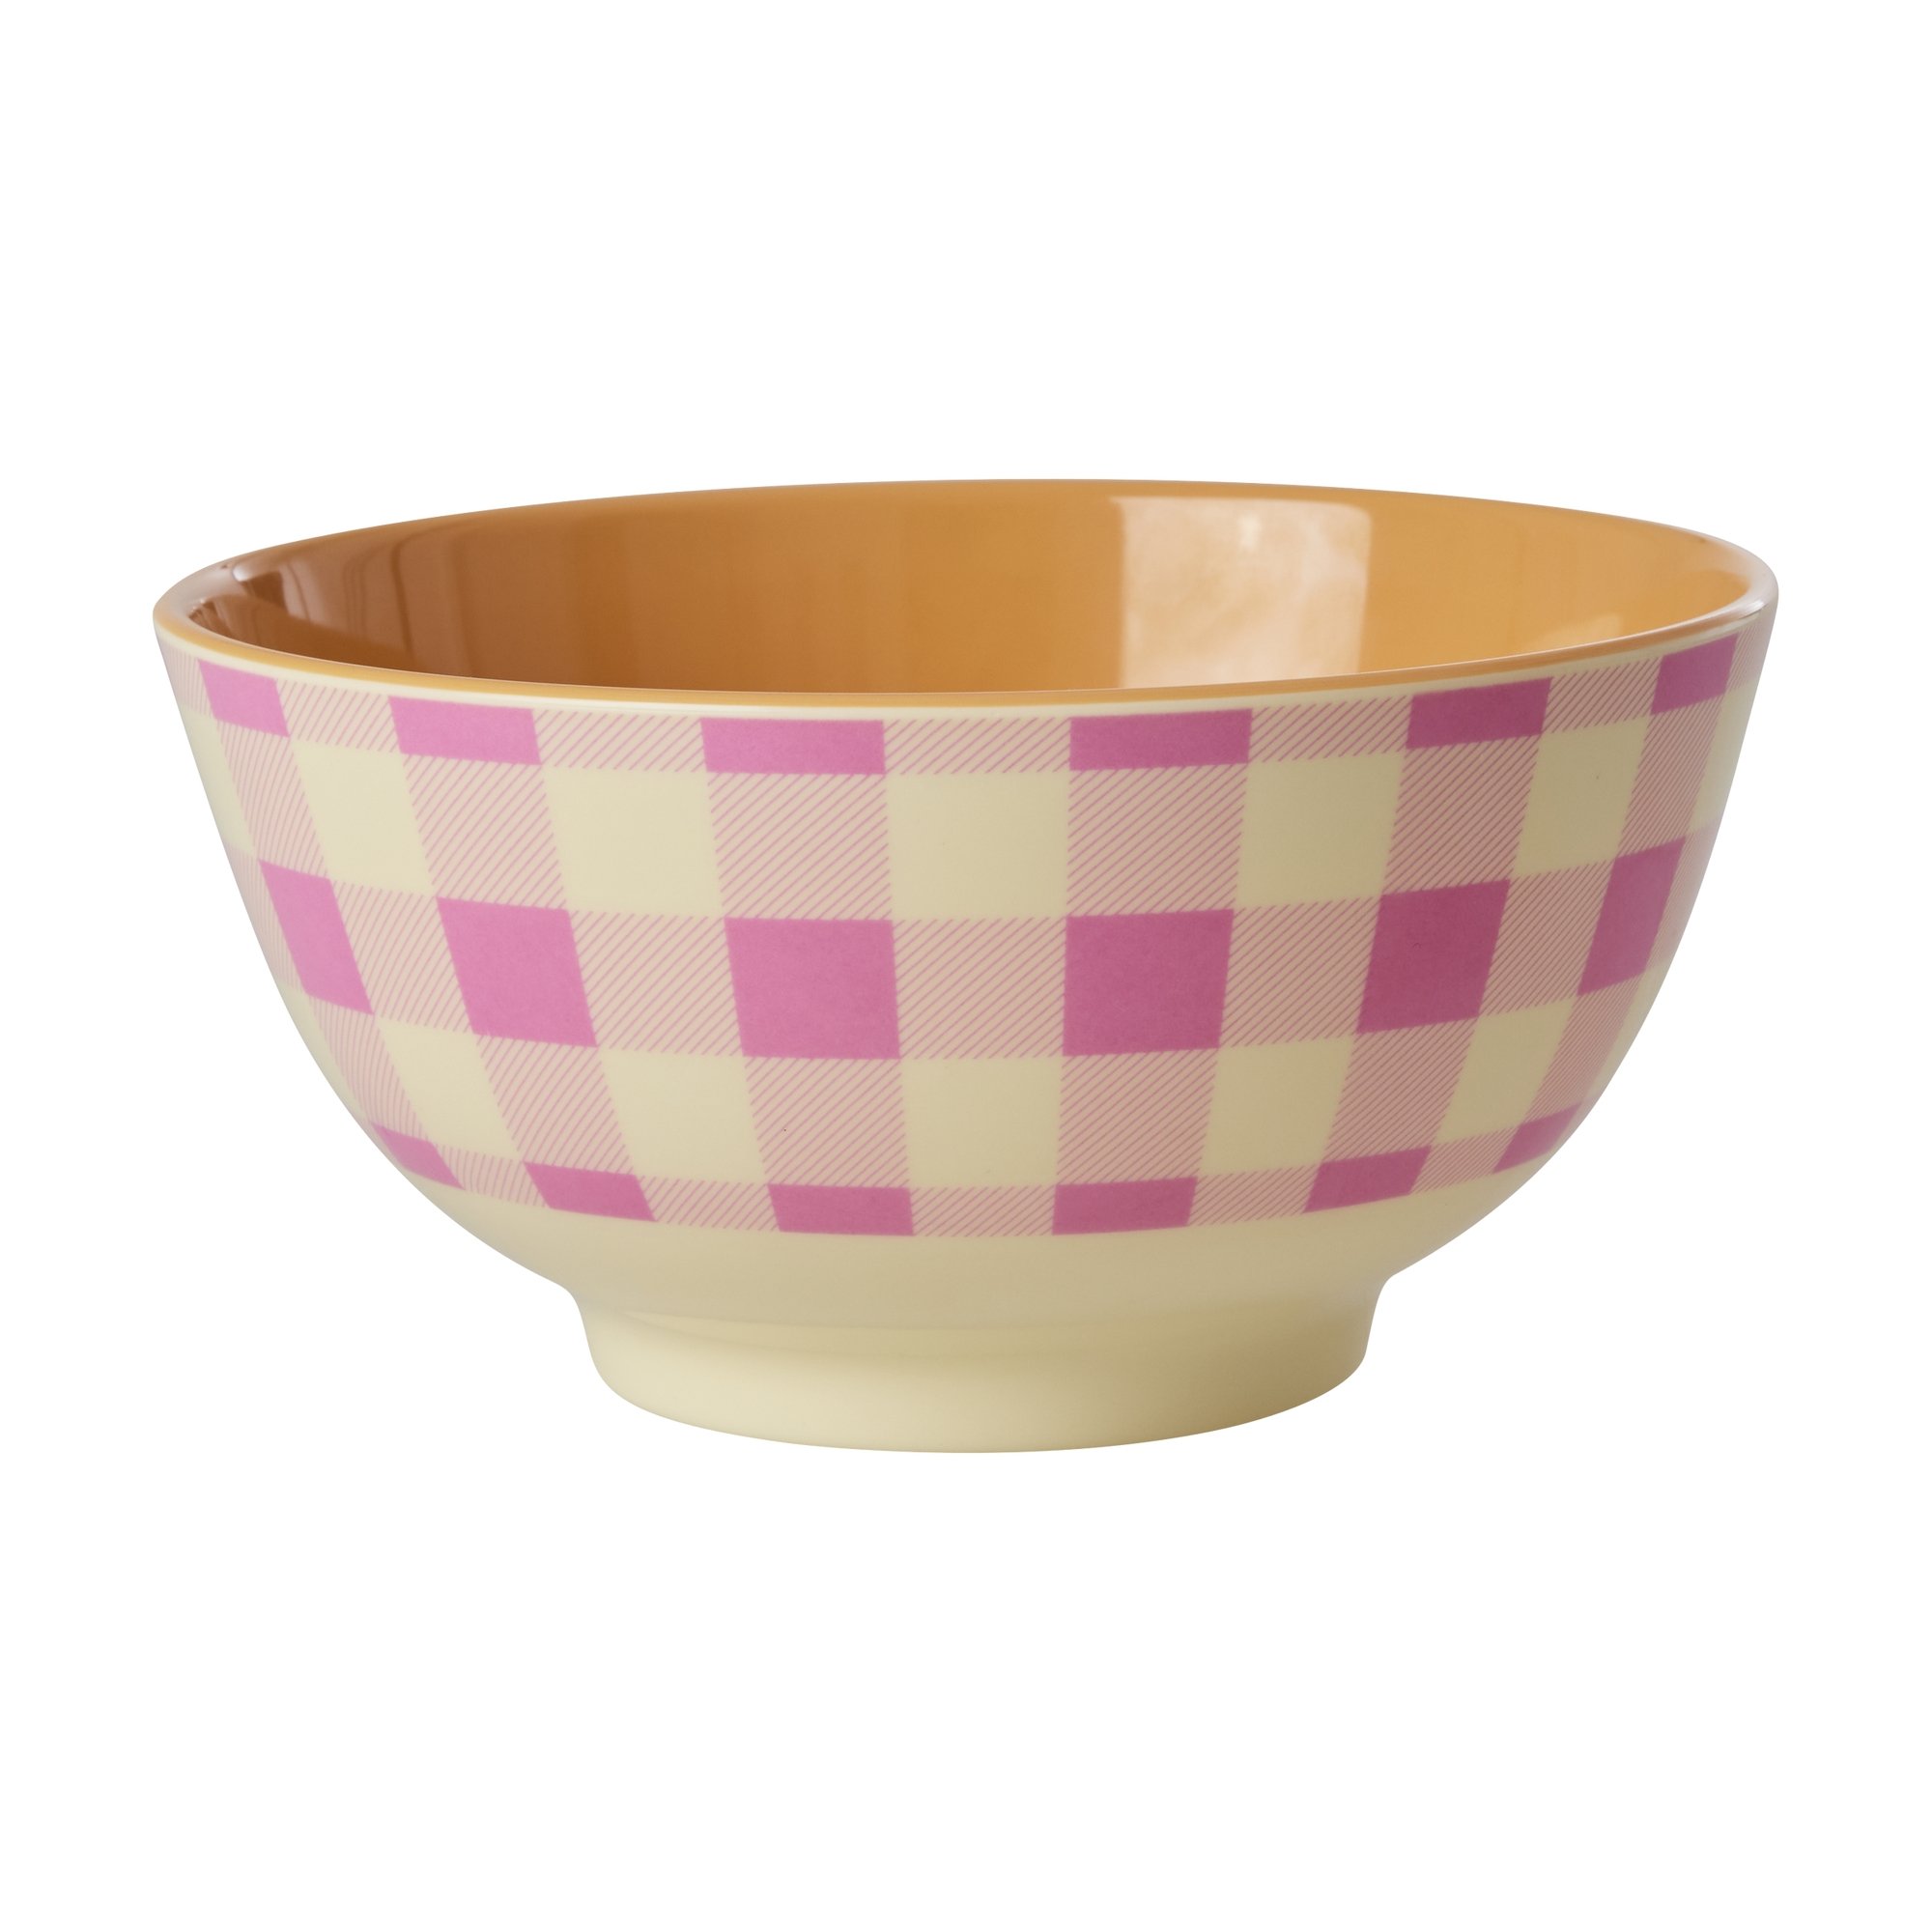 Rice - Melamine Bowl with Check It Out Print - Medium - 700 ml